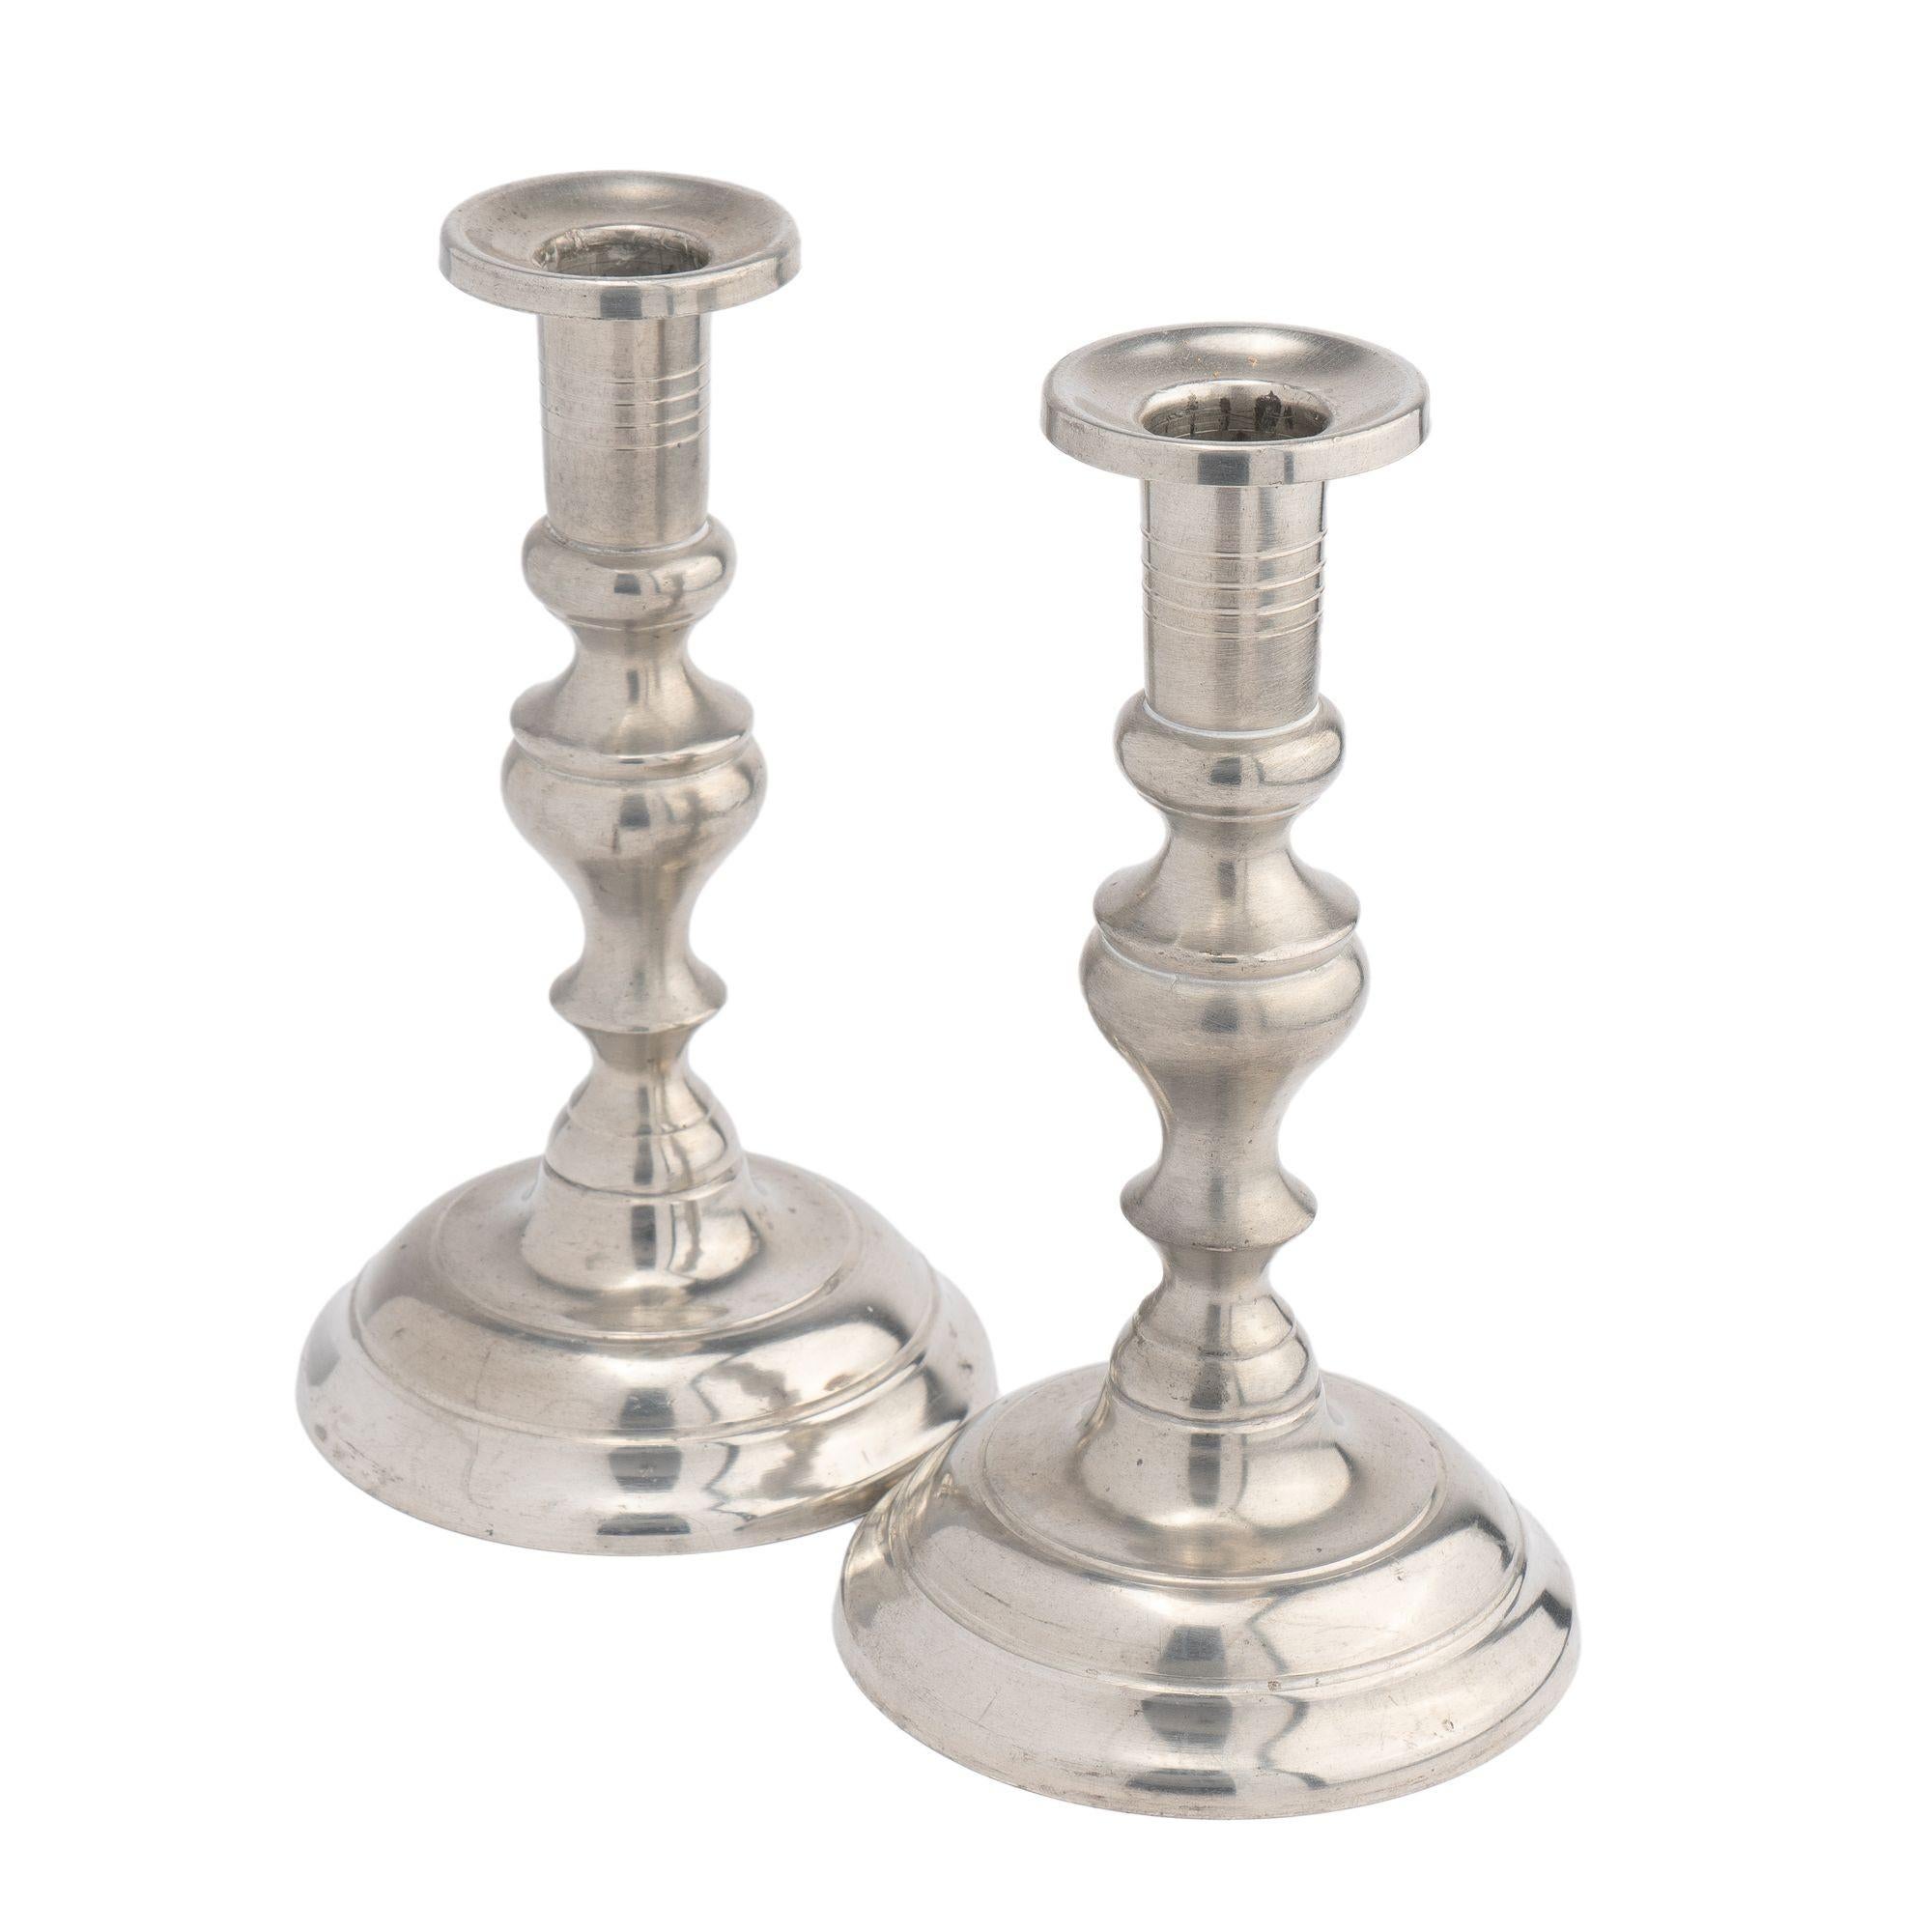 Pair of Colonial Revival circular dome base pewter candlesticks with an inverted baluster shaft and elongated urn form candle holder. After an 18th century English model. Makers stamp on the underside of the base.

American, Woodbury, Connecticut,